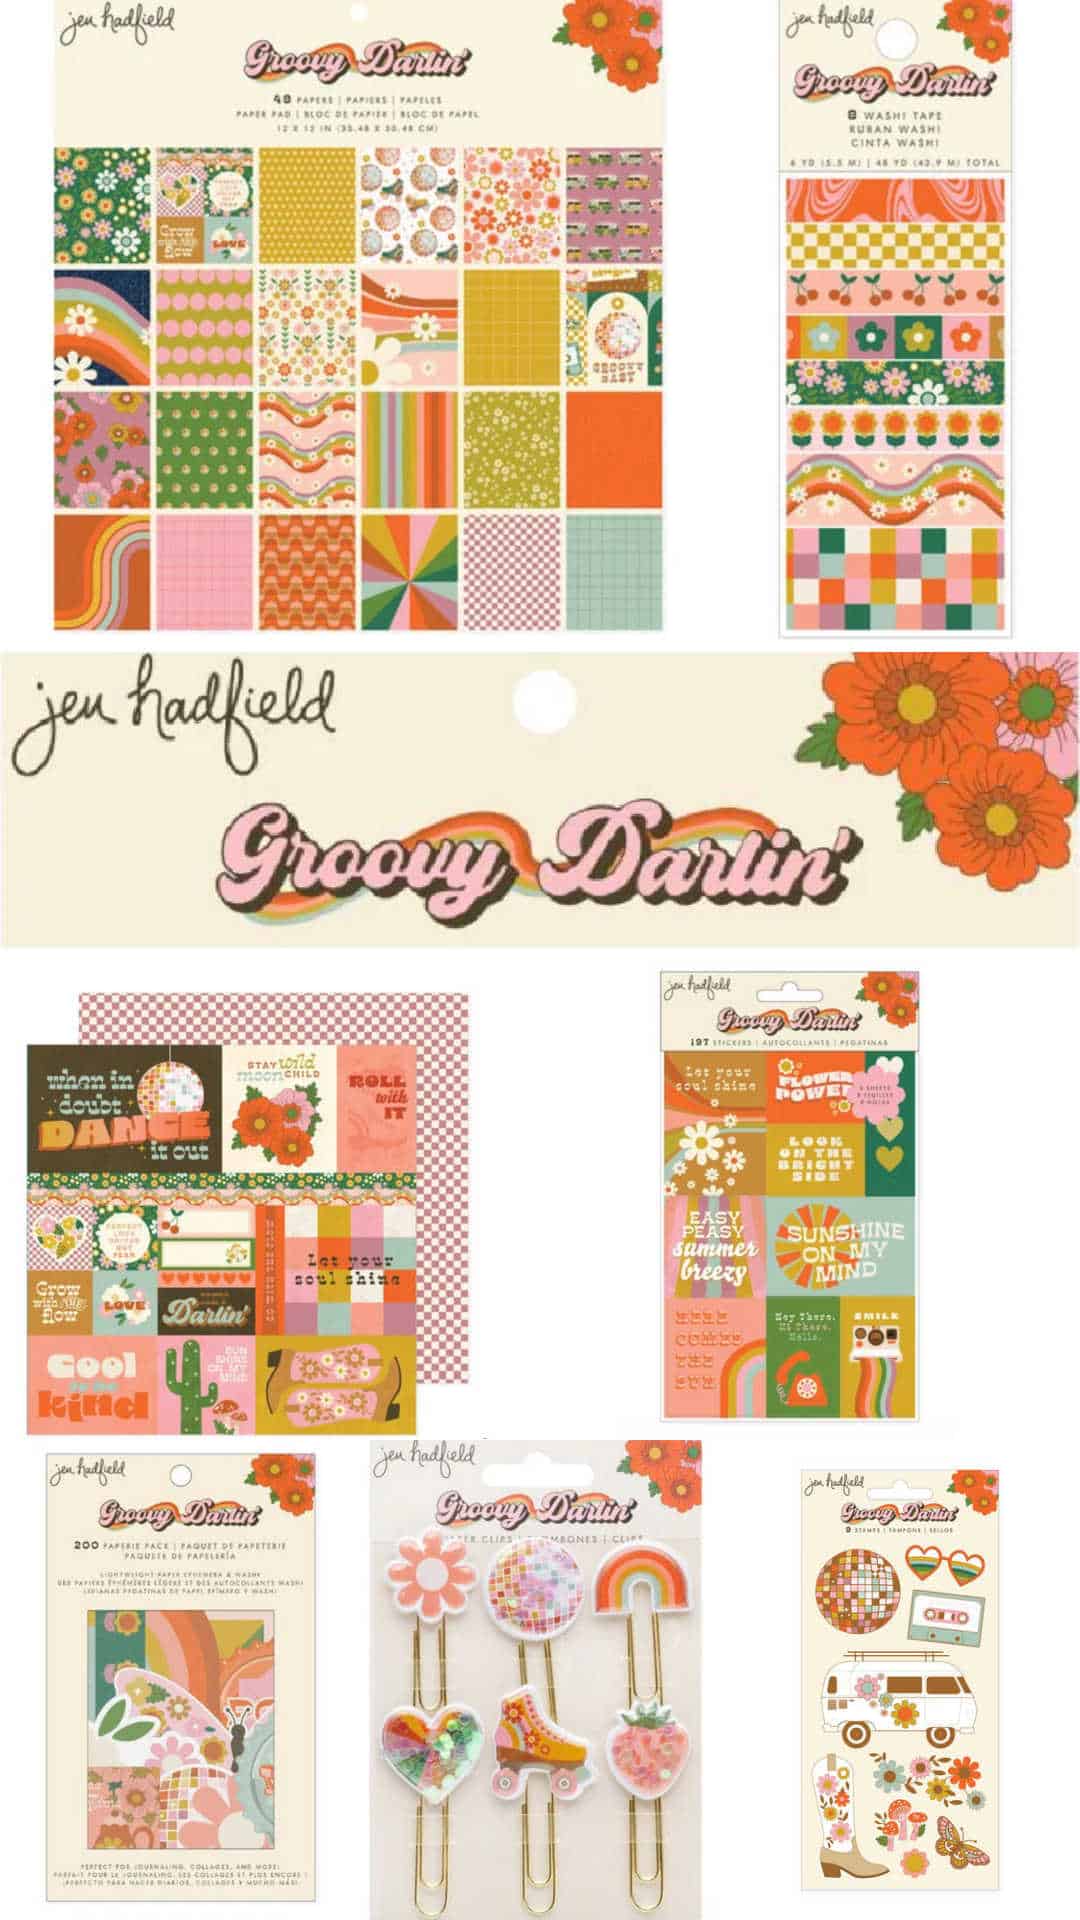 Jen Hadfield Groovy Darlin' line is now at JoAnn Stores and other crafting stores 